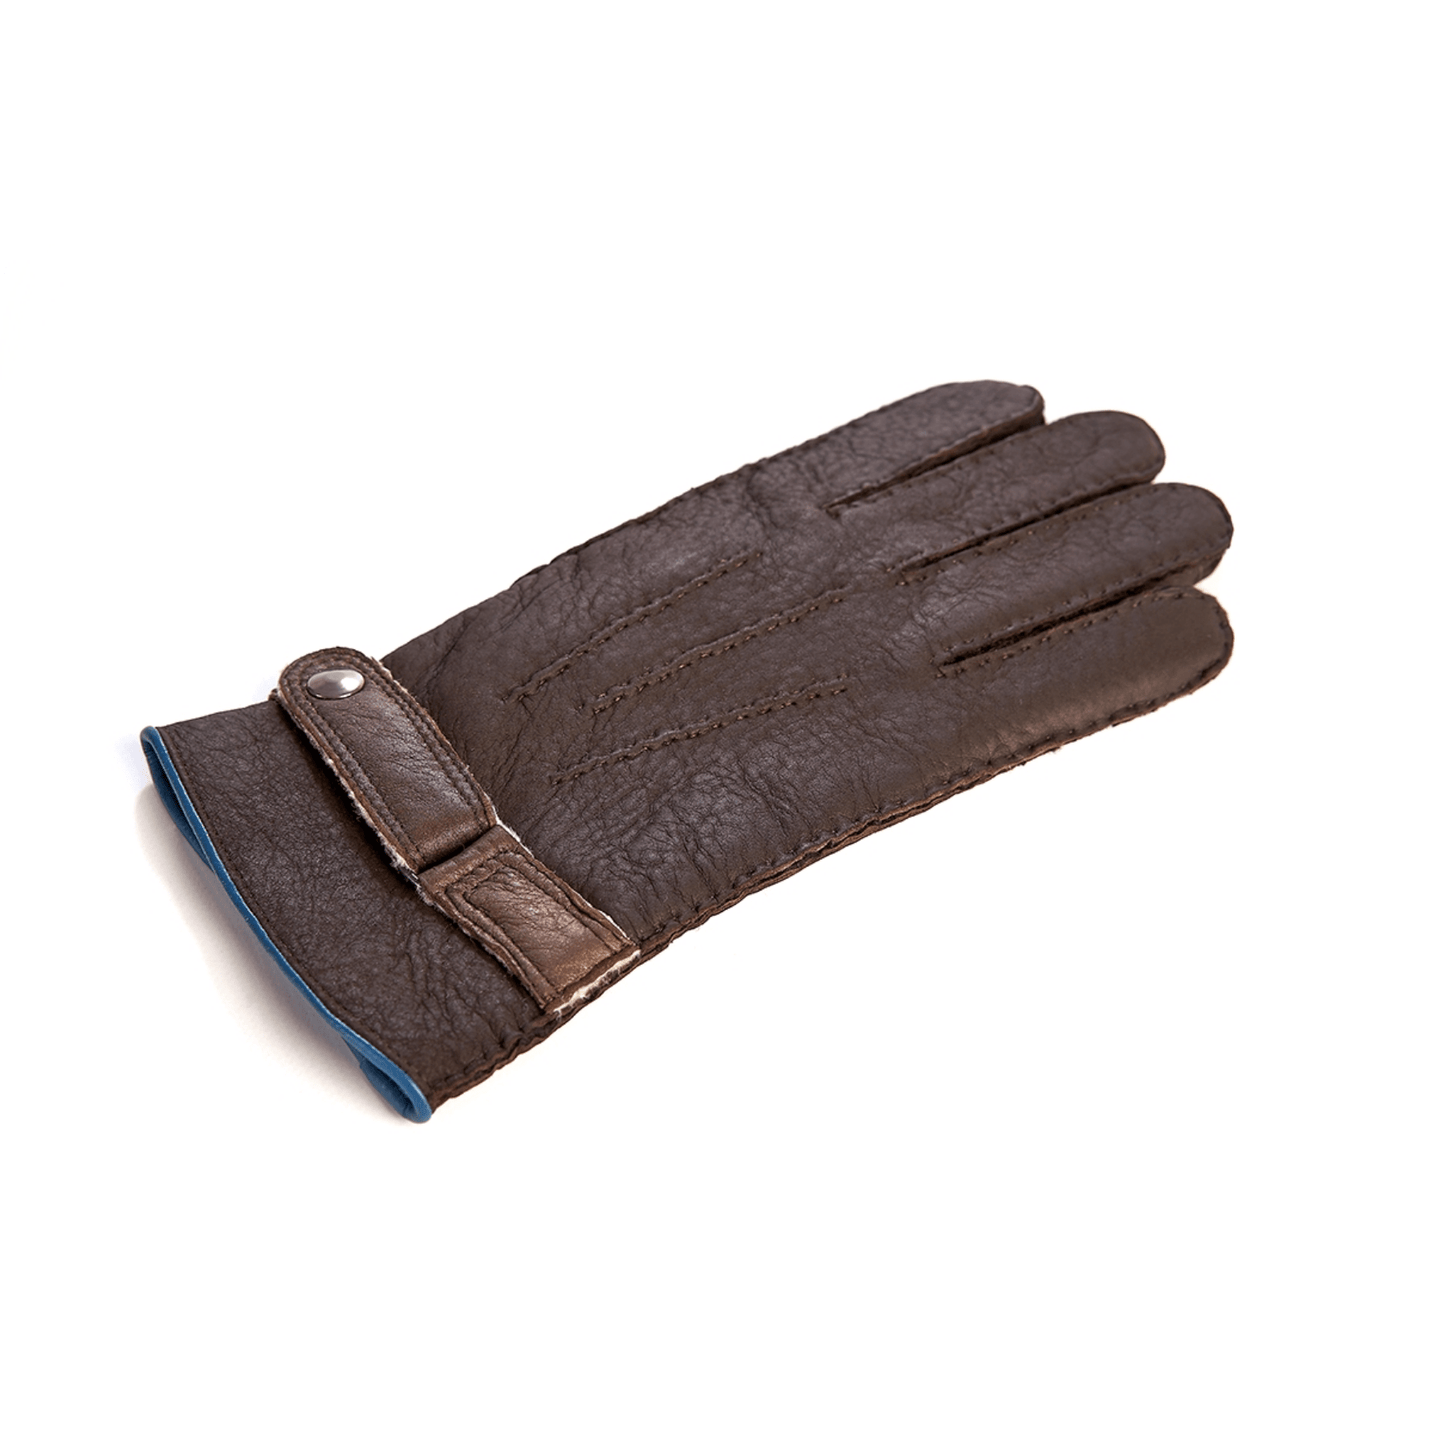 Men's curly lambskin gloves in brown color with metallic lambskin strap details